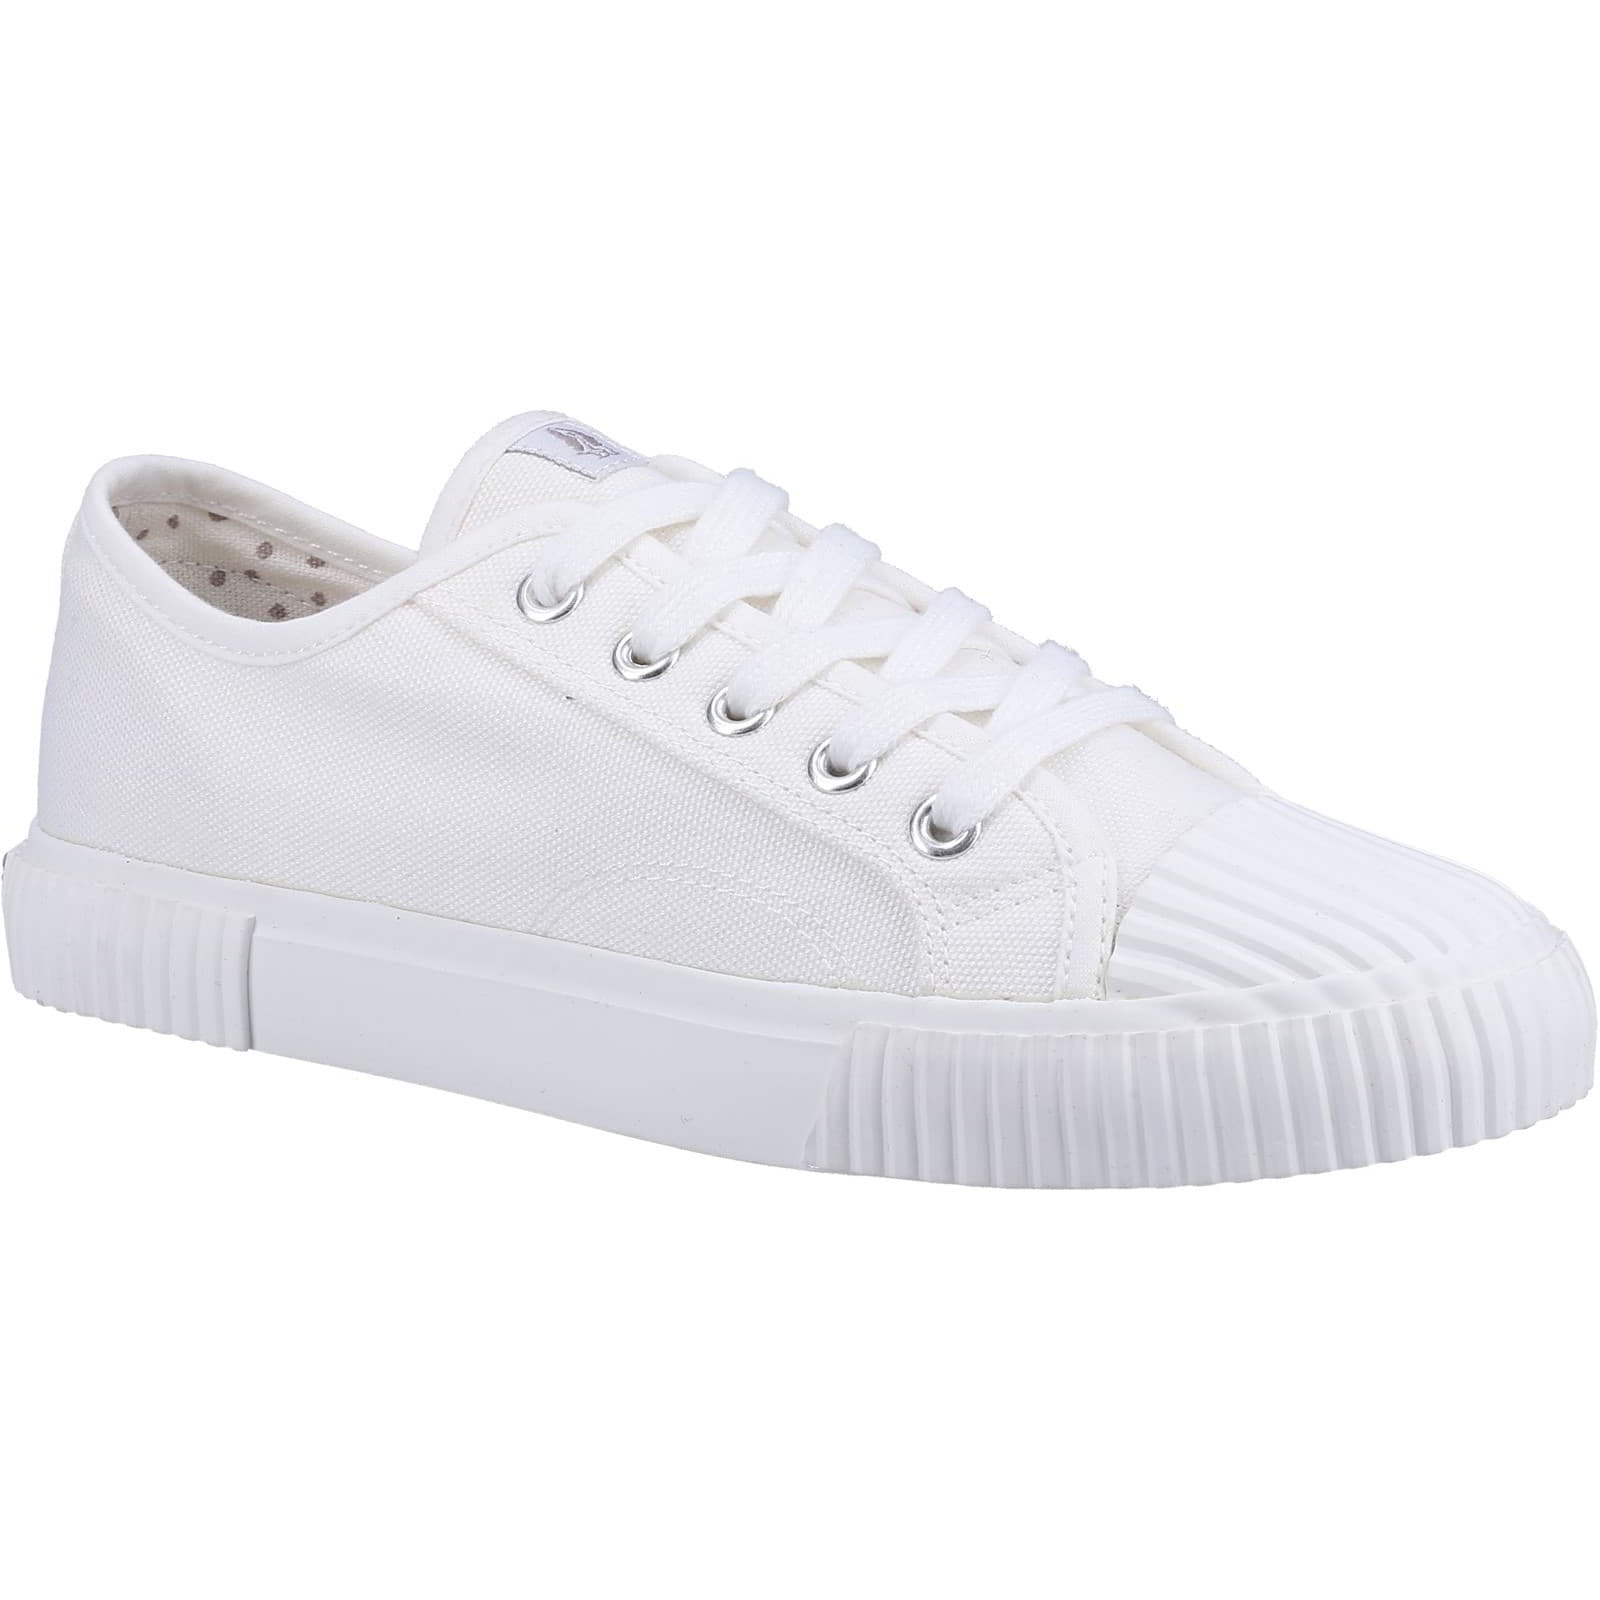 Hush Puppies Women's Brooke Lace Up Canvas Shoes Trainers - UK 3